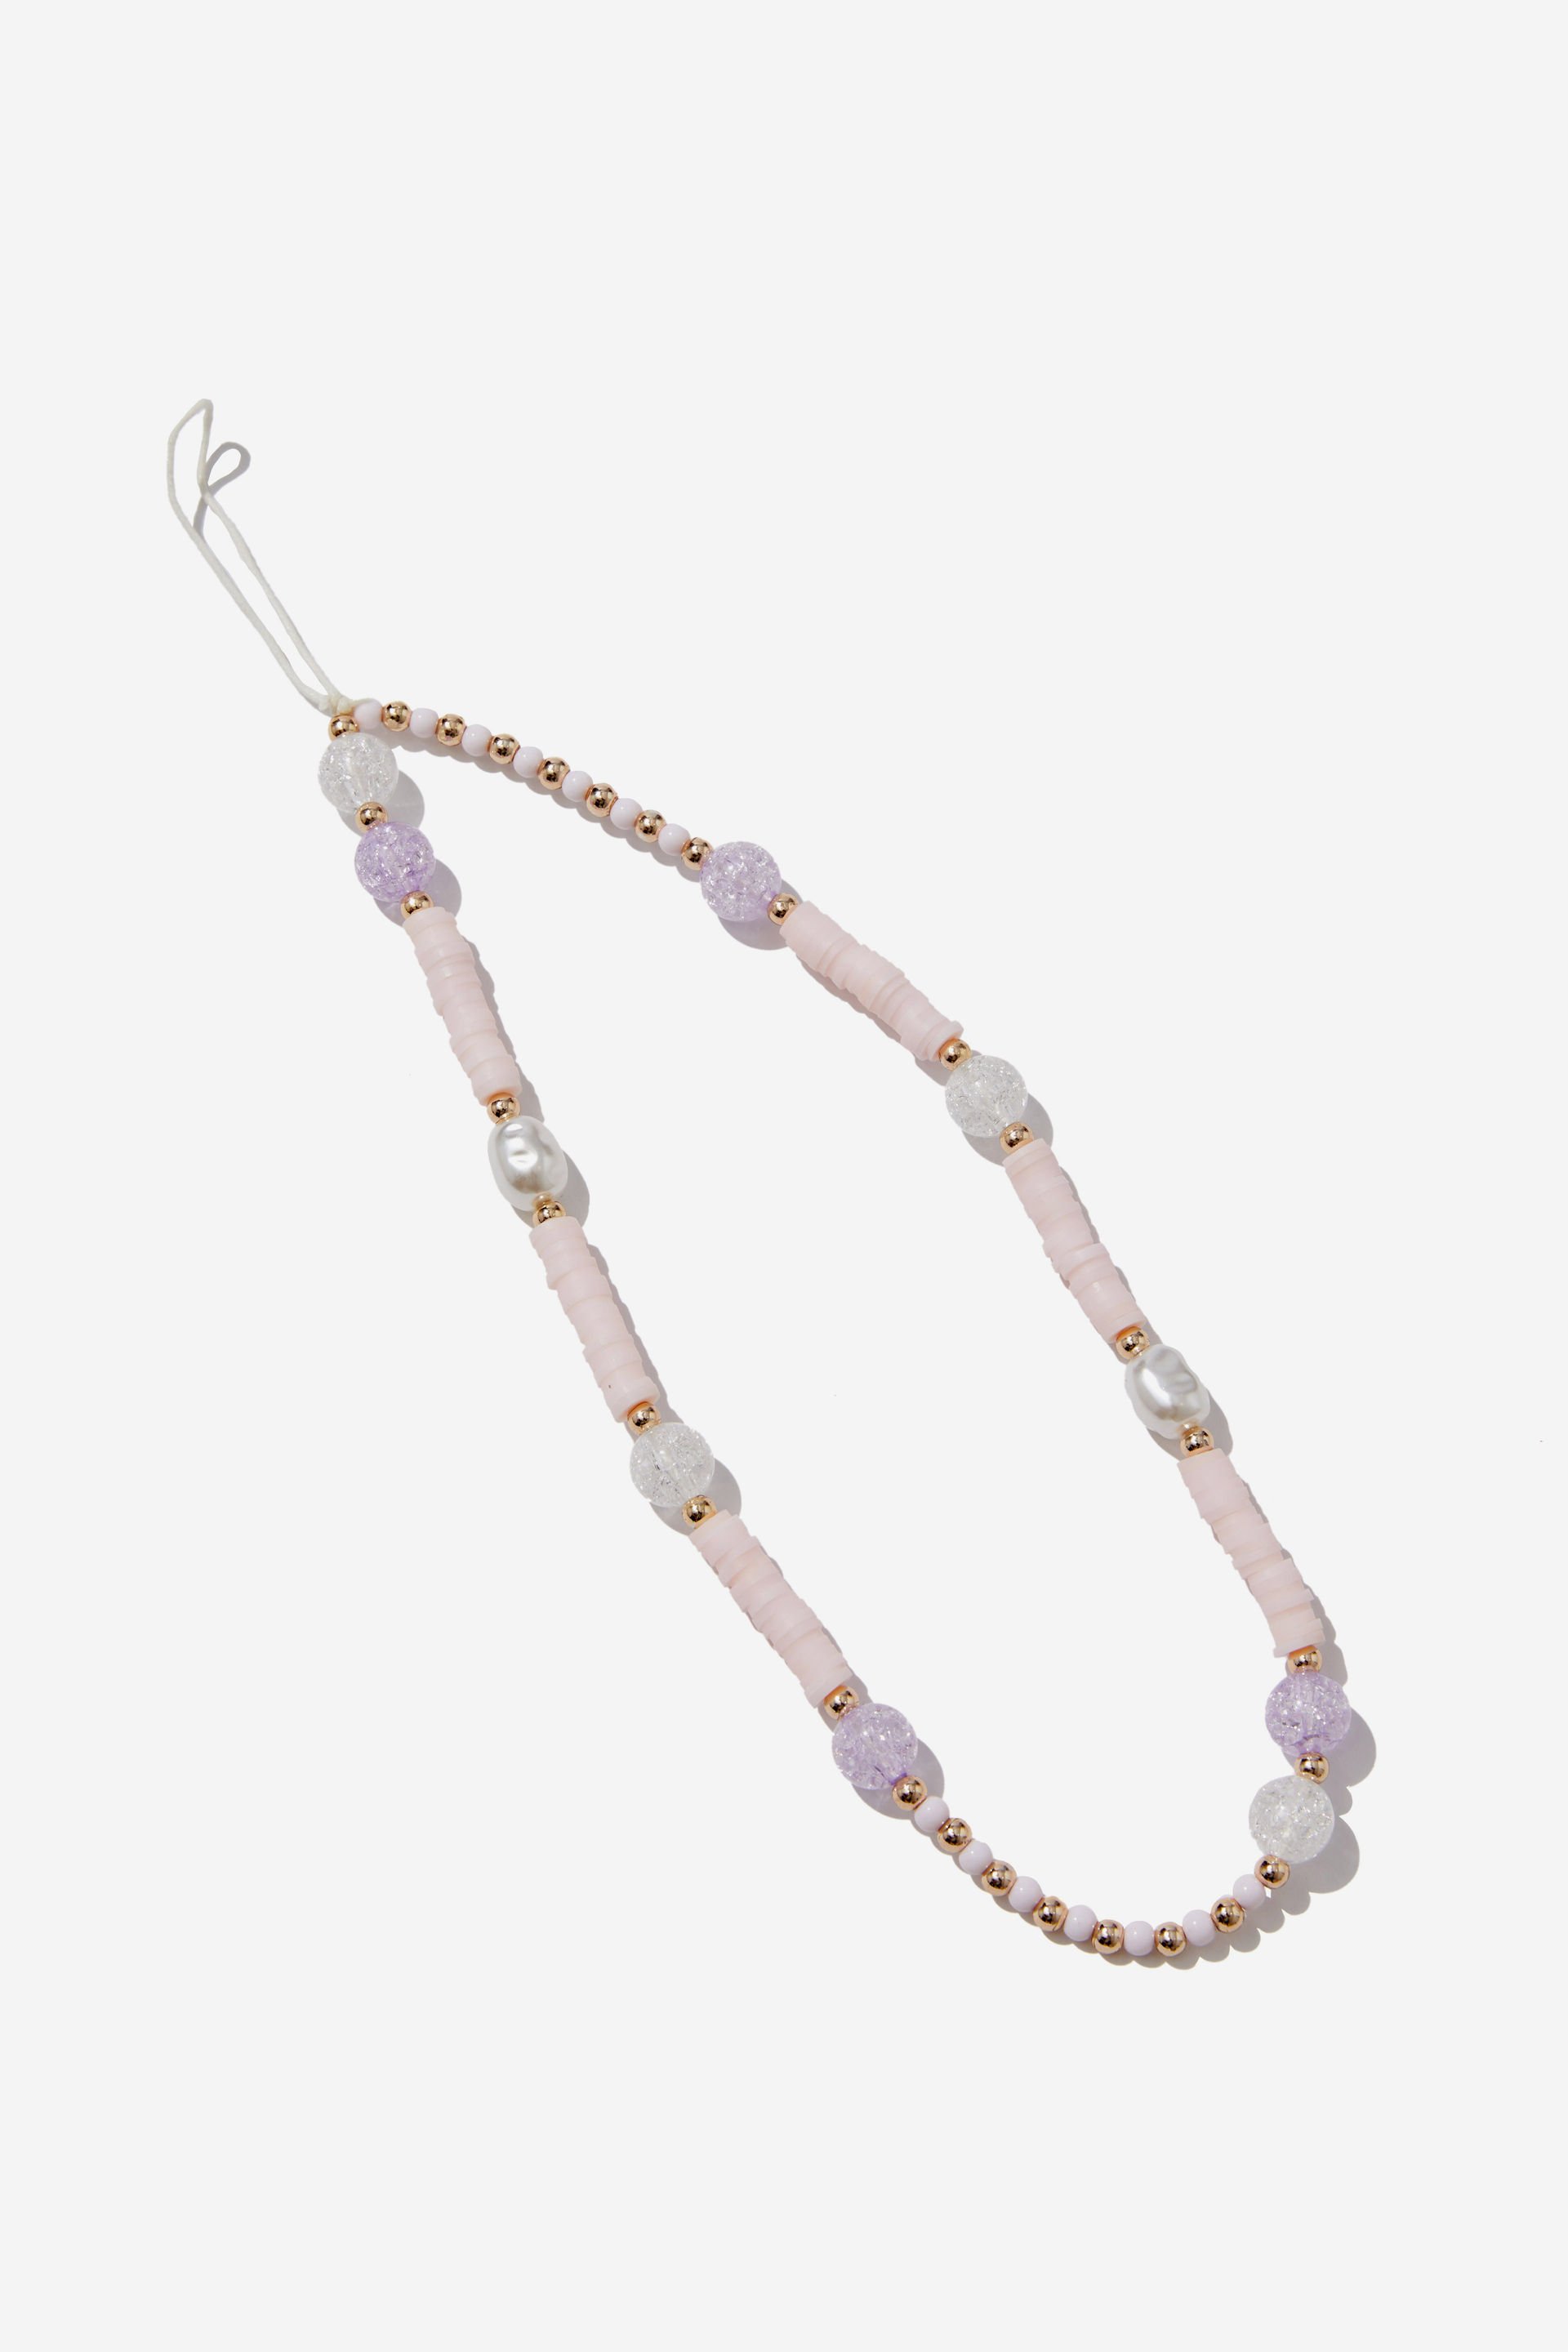 Typo - Carried Away Phone Charm Strap - Pastel pearls